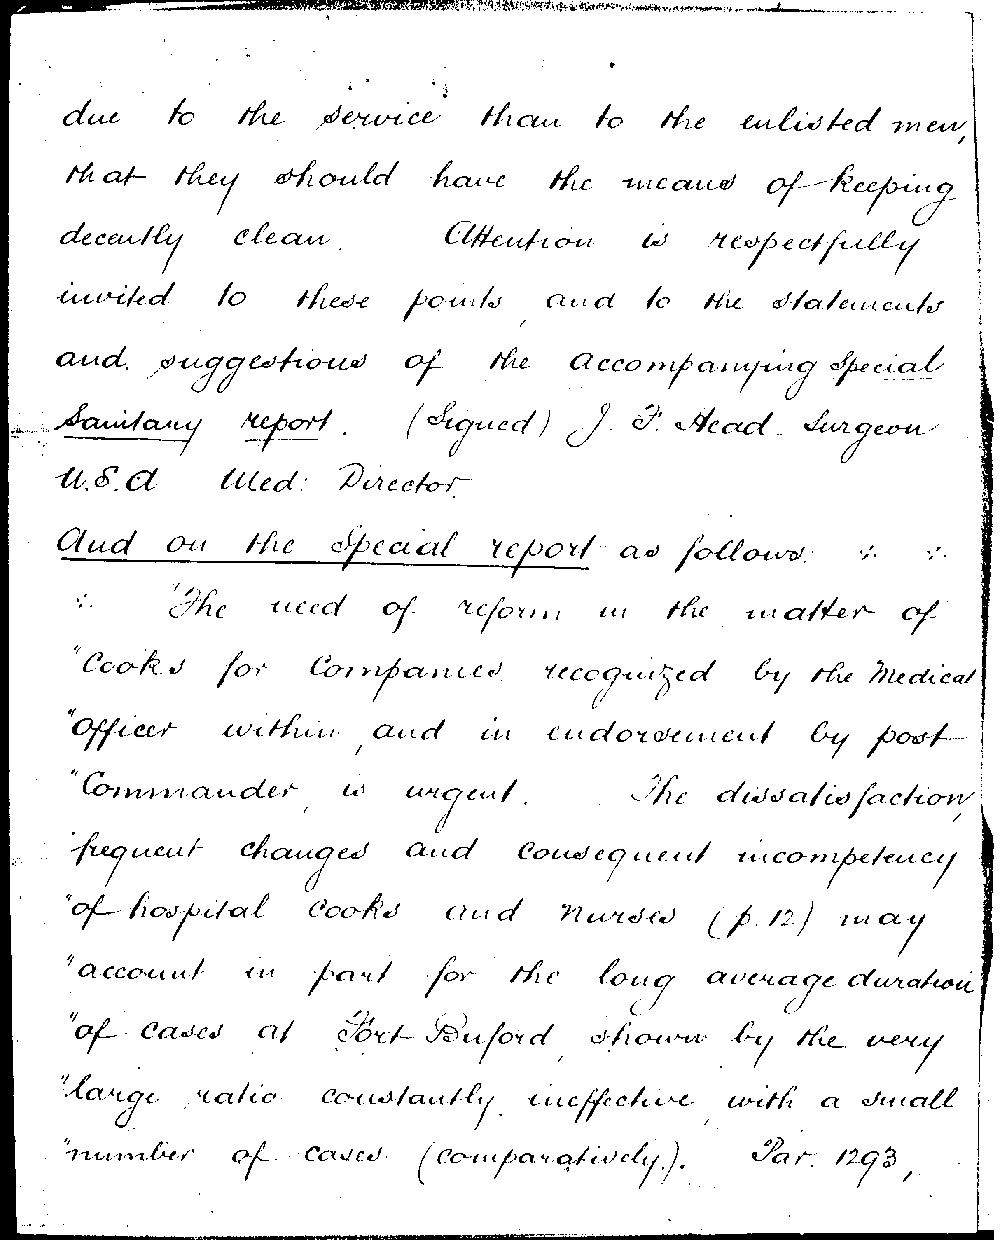 The Sanitation Report from Fort Buford identifies several conditions contributing to poor health among the enlisted soldiers. Most shocking is the lack of bathing facilities. Men bathed in the Missouri River in the summer and apparently did not bathe during the winter. When Fort Buford was re-built, a water tower was built to provide clean water for drinking and bathing at the post.